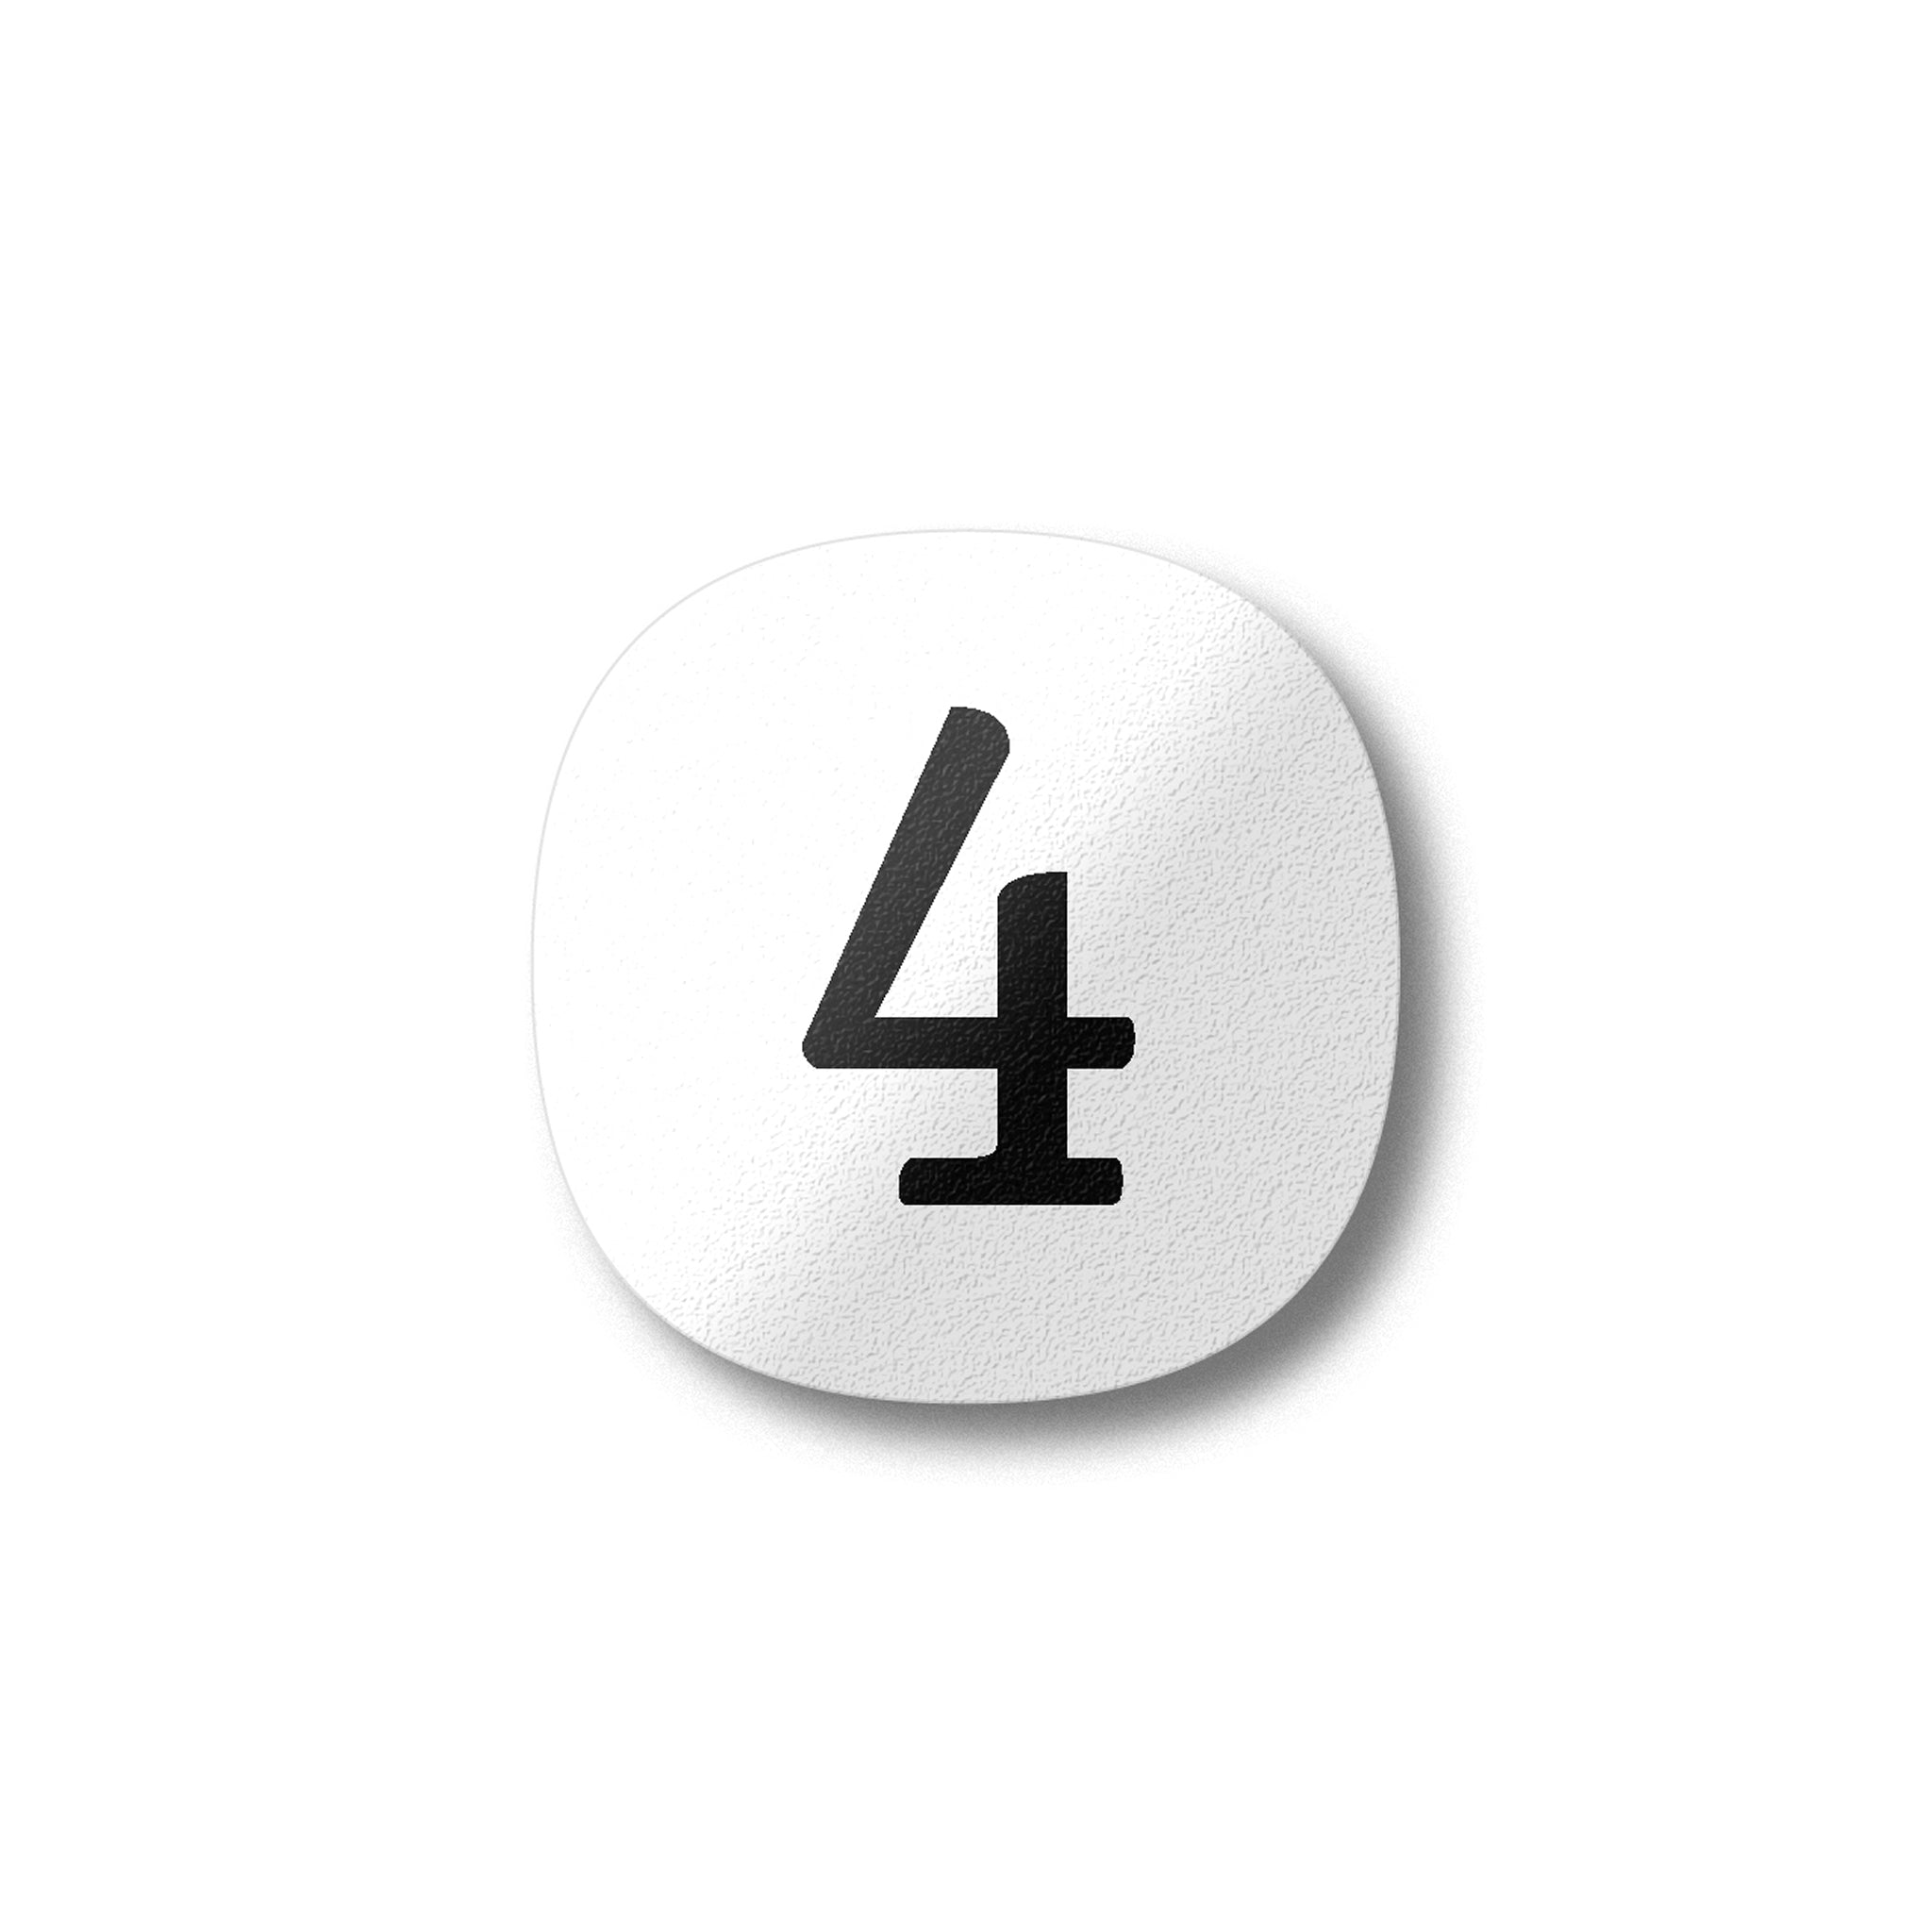 A black number four on a white background design plywood fridge magnet by Beyond the Fridge